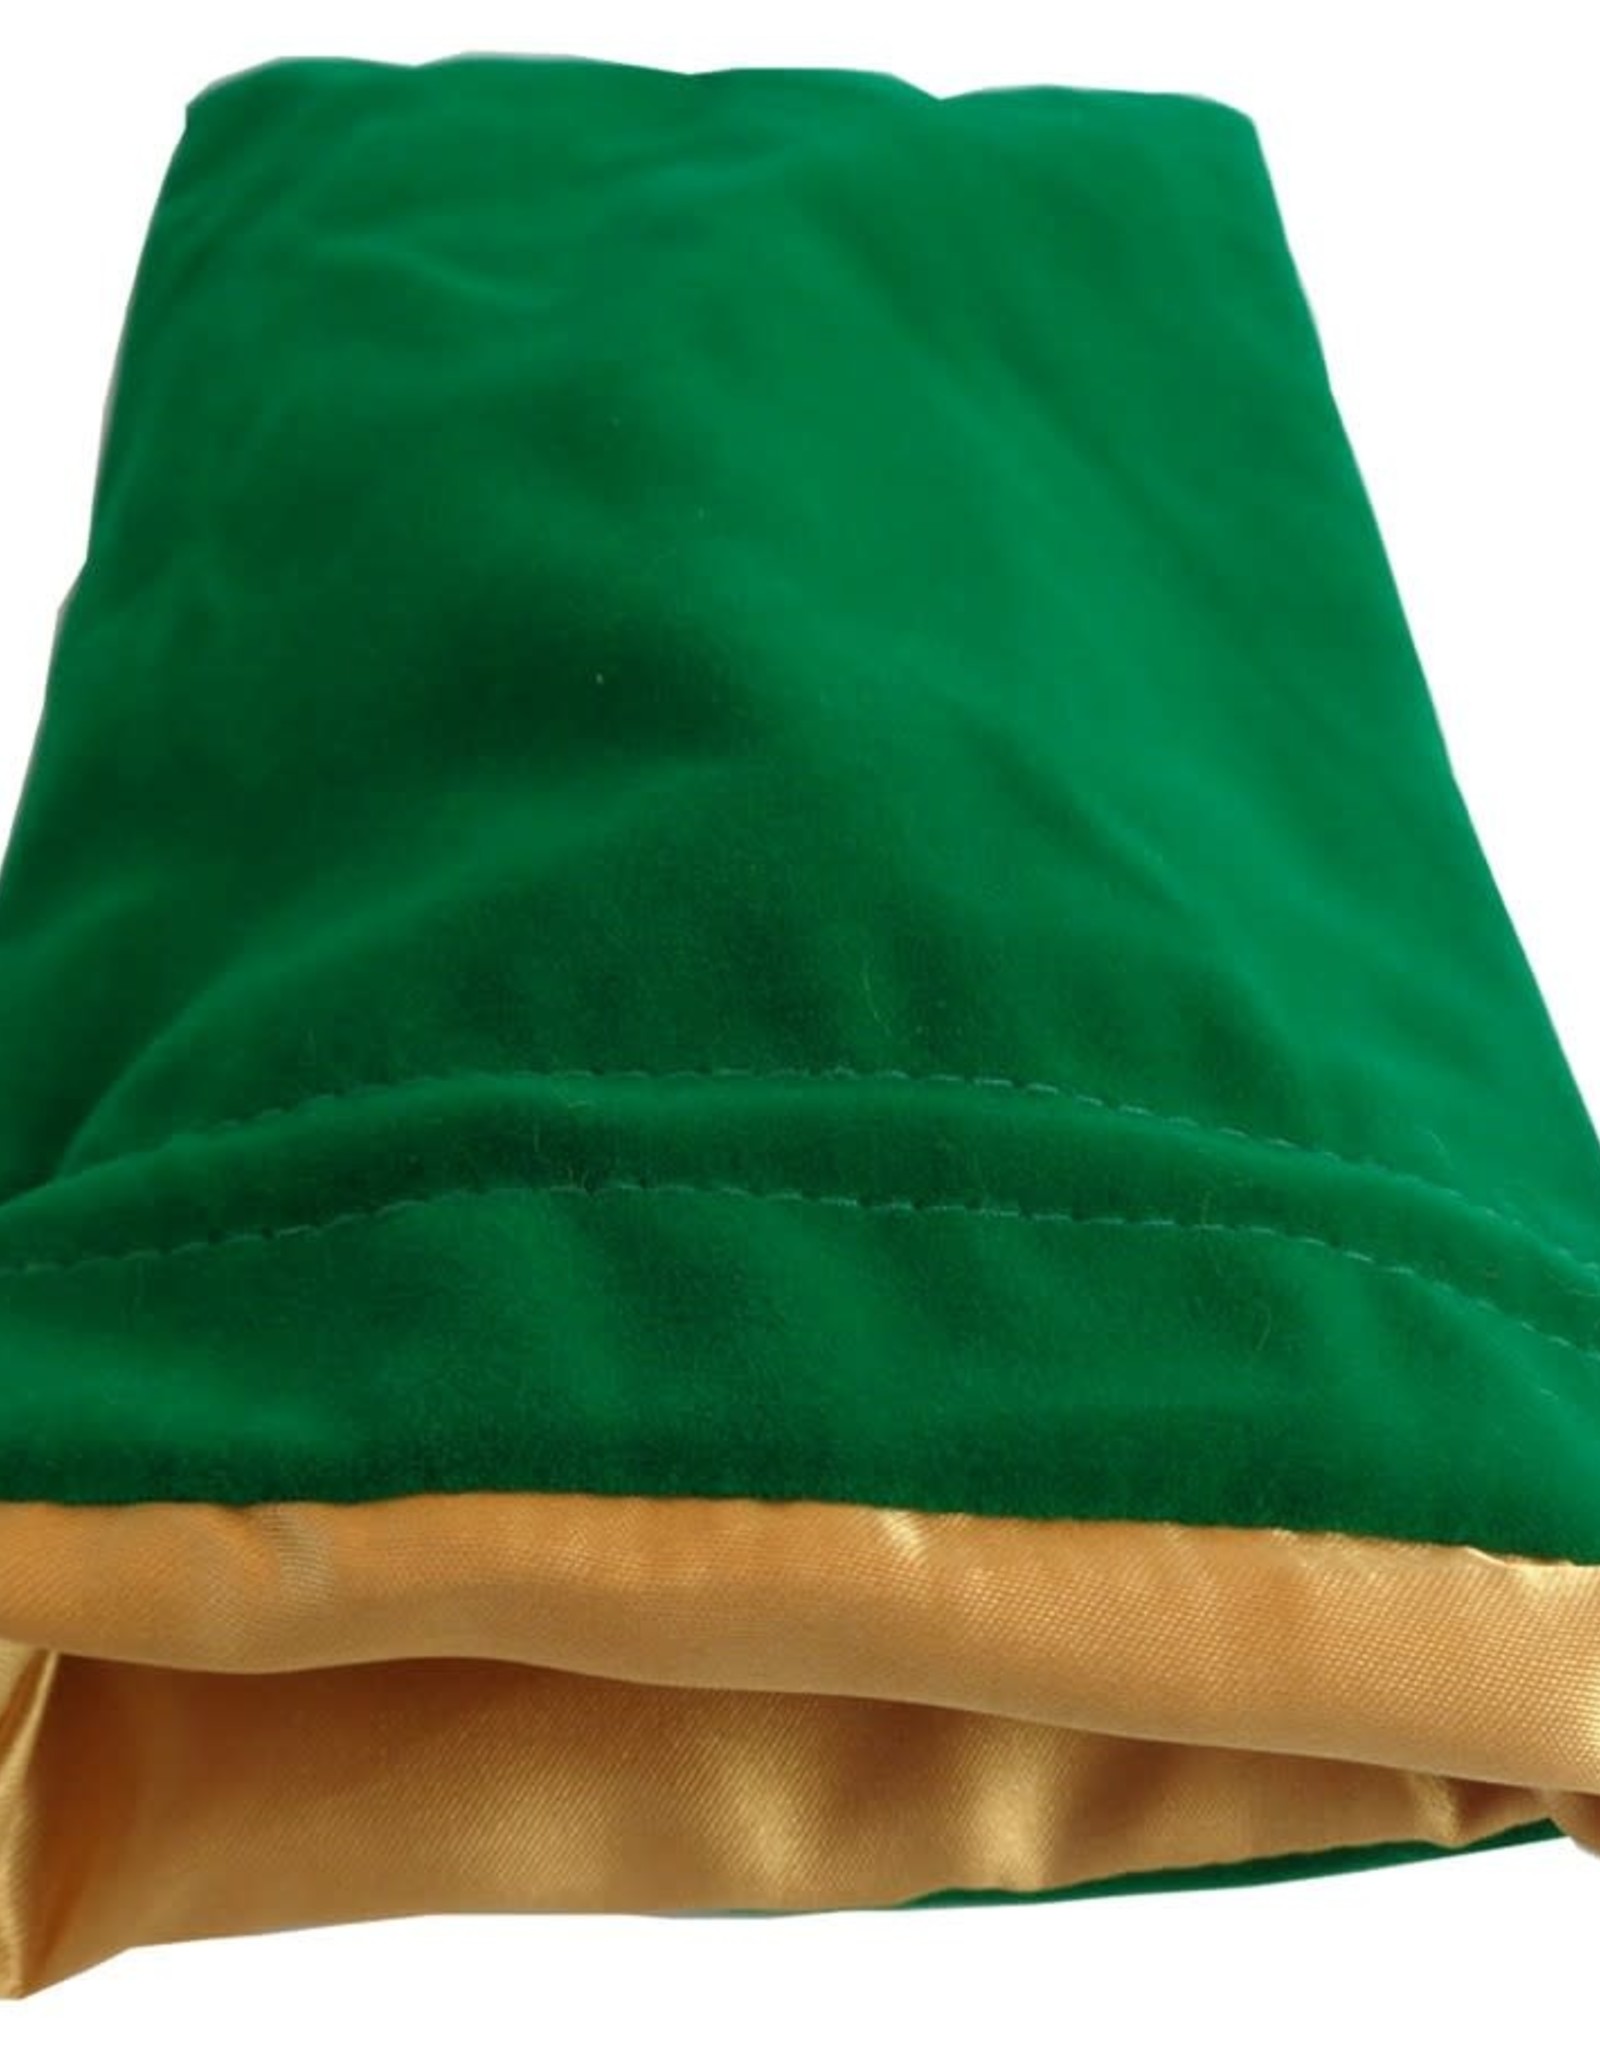 Metallic Dice Games Dice Bag: 6in x 8in LARGE Green Velvet with Gold Satin Lining